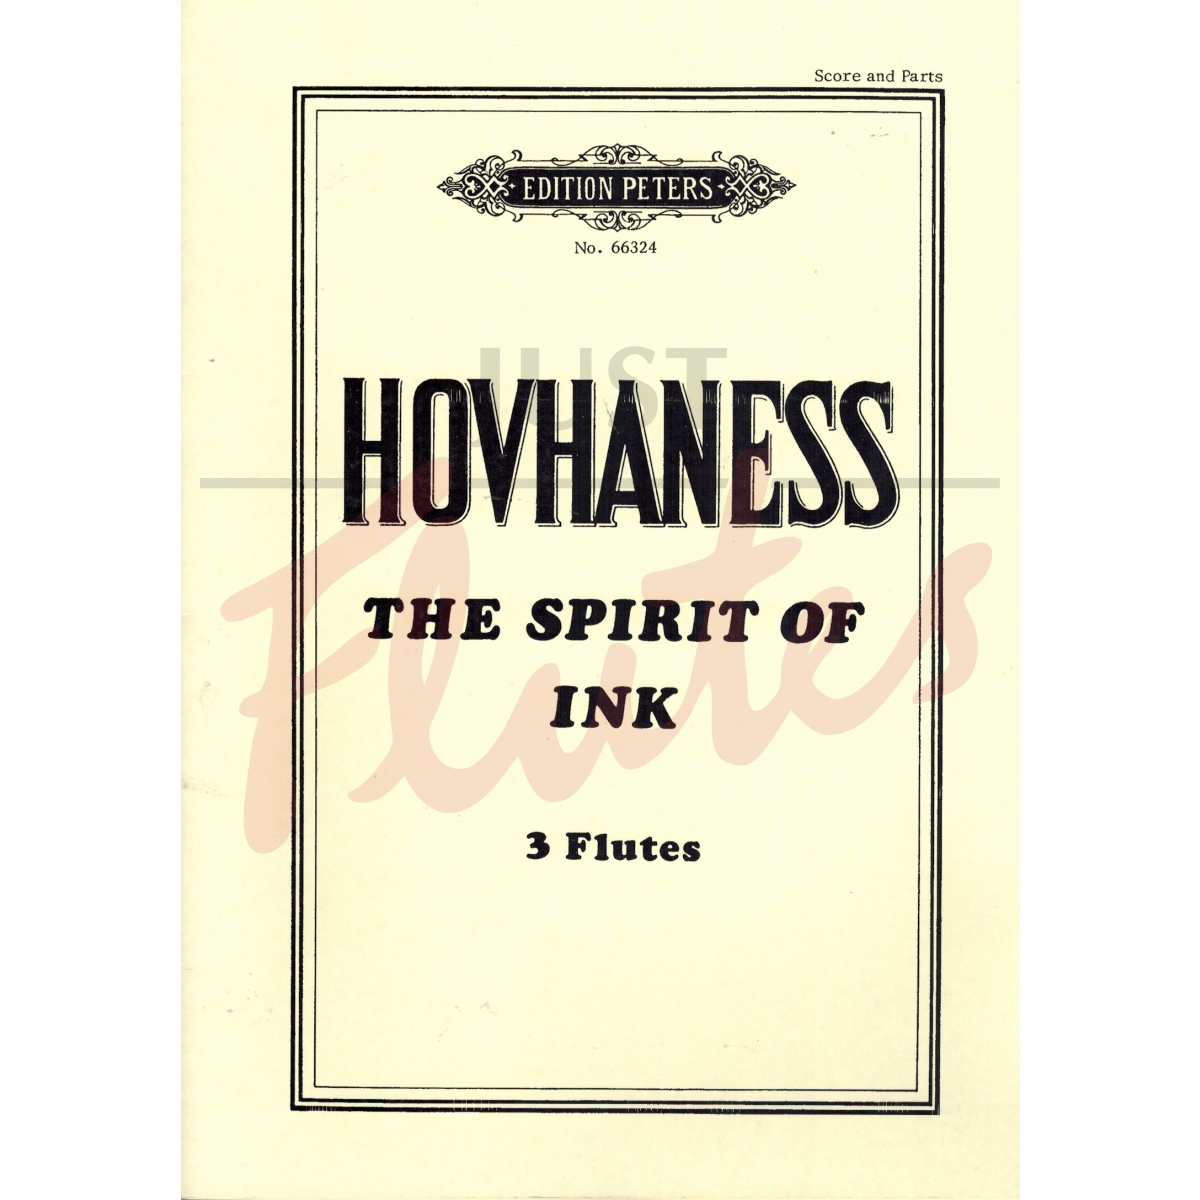 The Spirit of Ink for Three Flutes